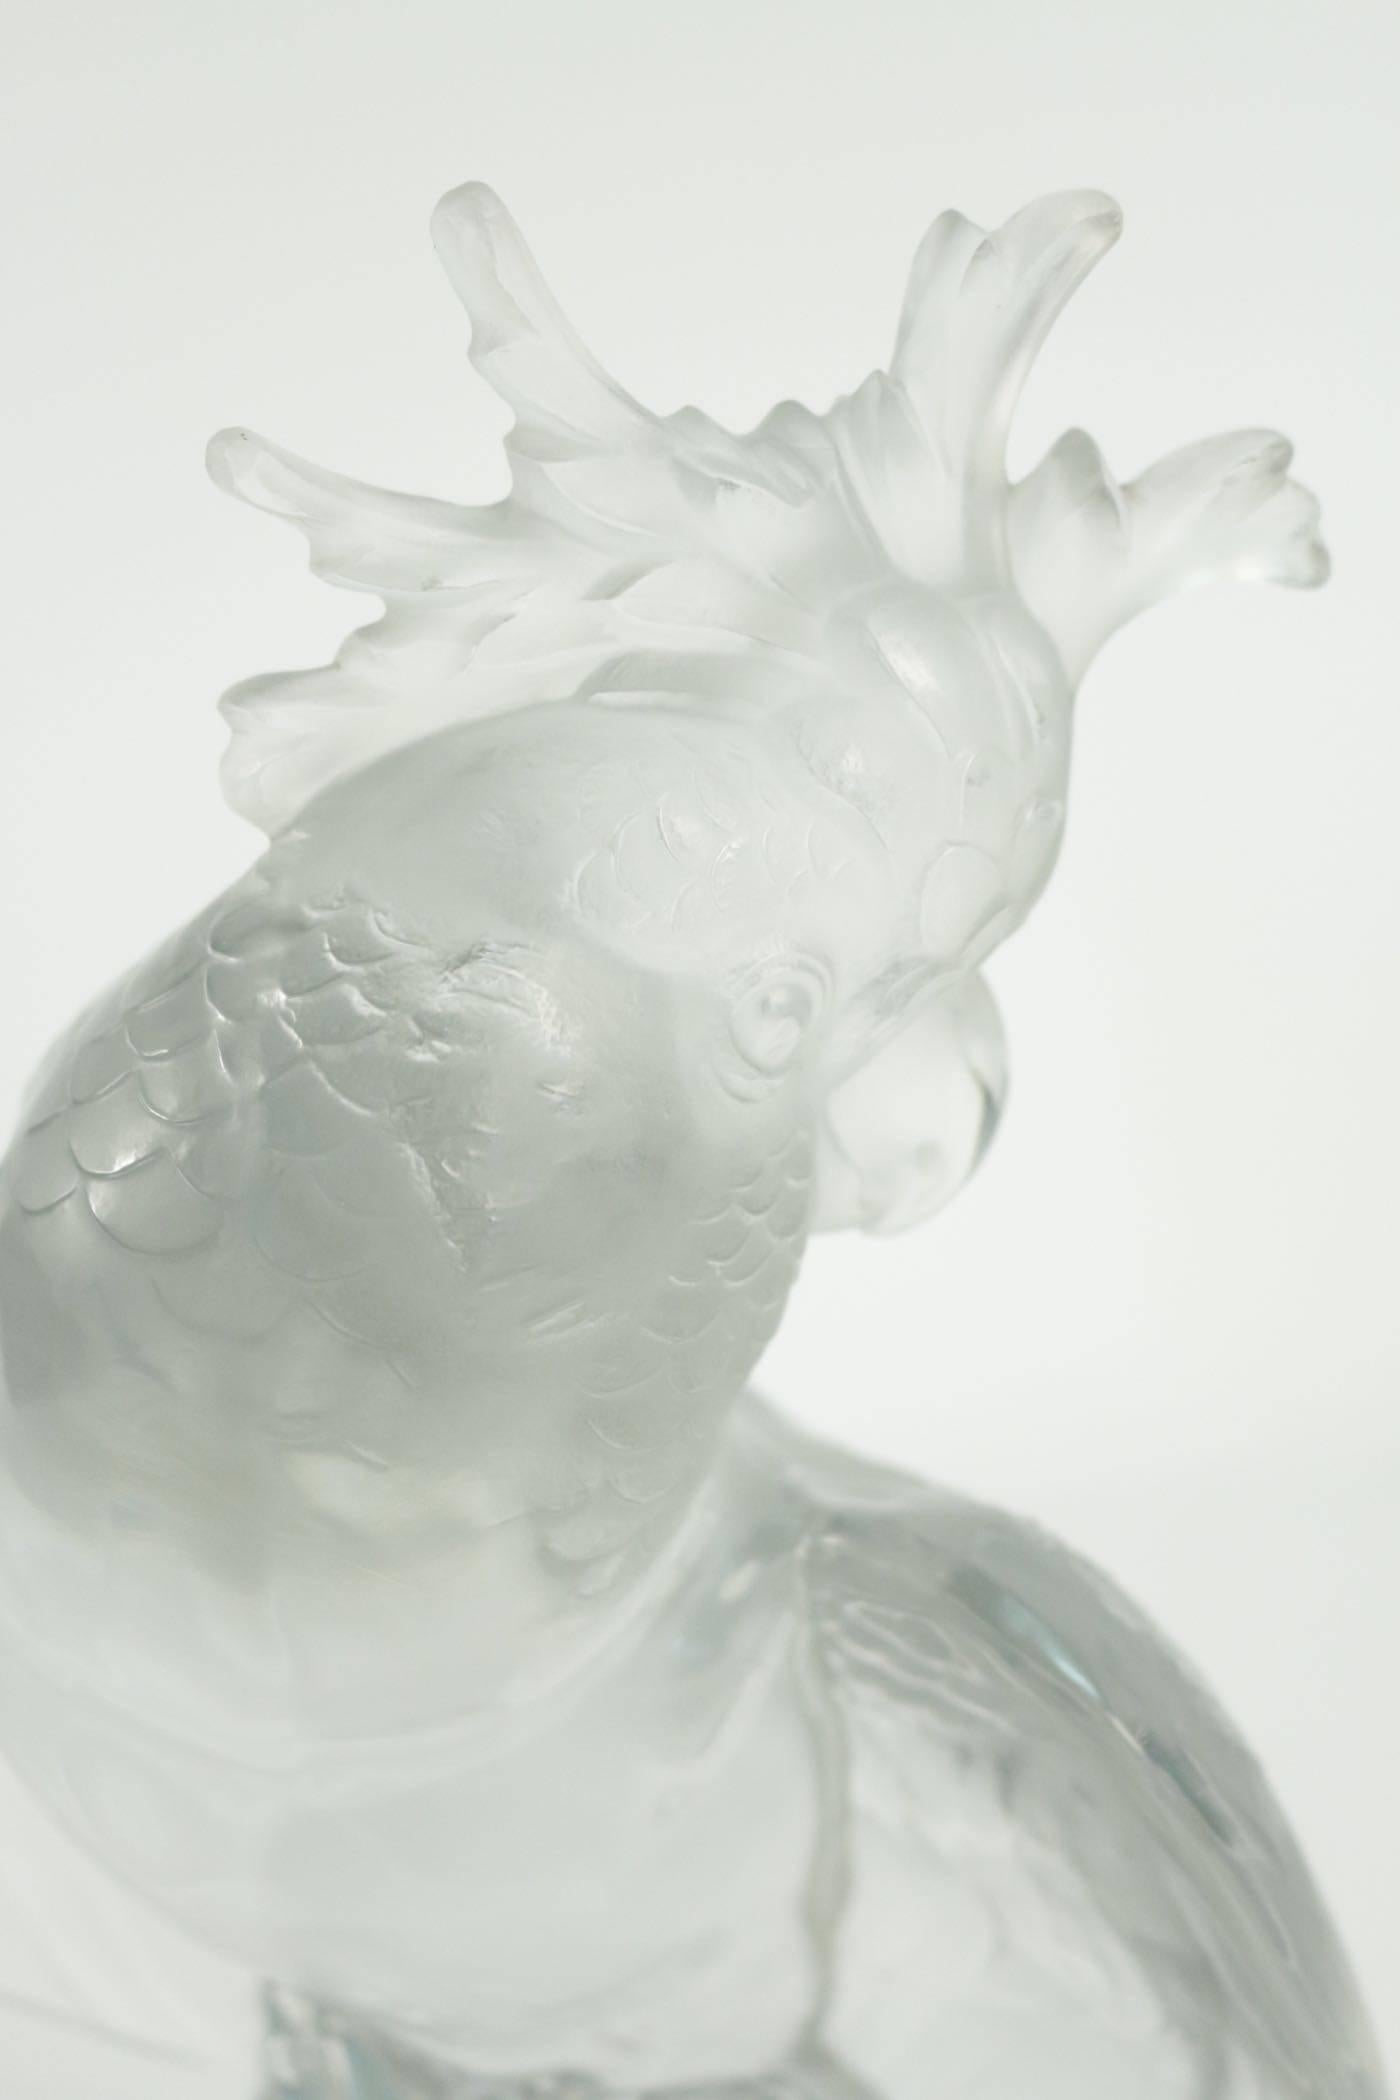 Pressed molded glass parrot
The wings spread out, resting on a thick conical base.

Lalique France Industrial print test on the base.